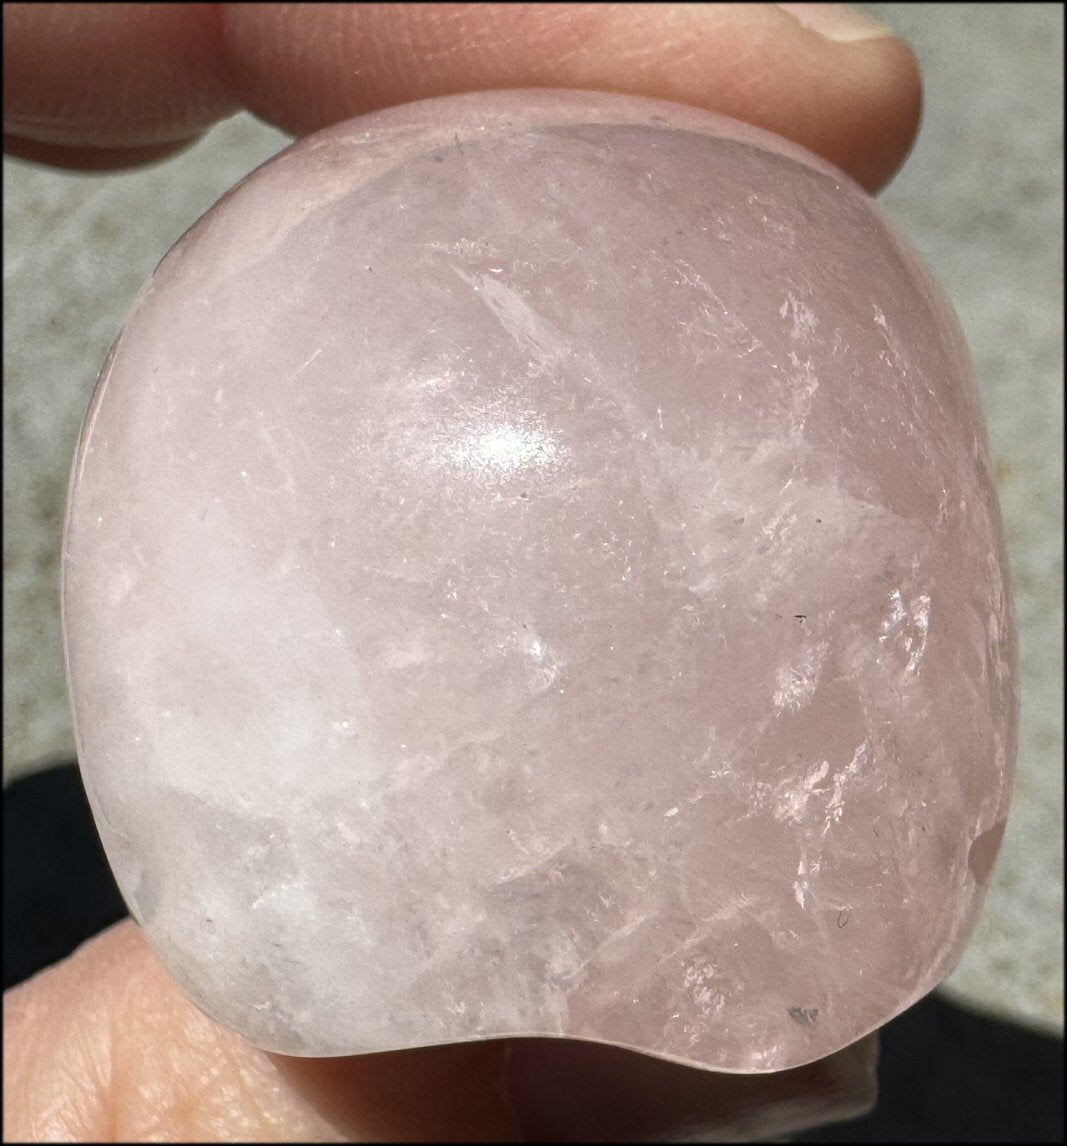 ROSE QUARTZ Crystal Skull - Heart Chakra, Self-Acceptance - with Synergy 8+ years